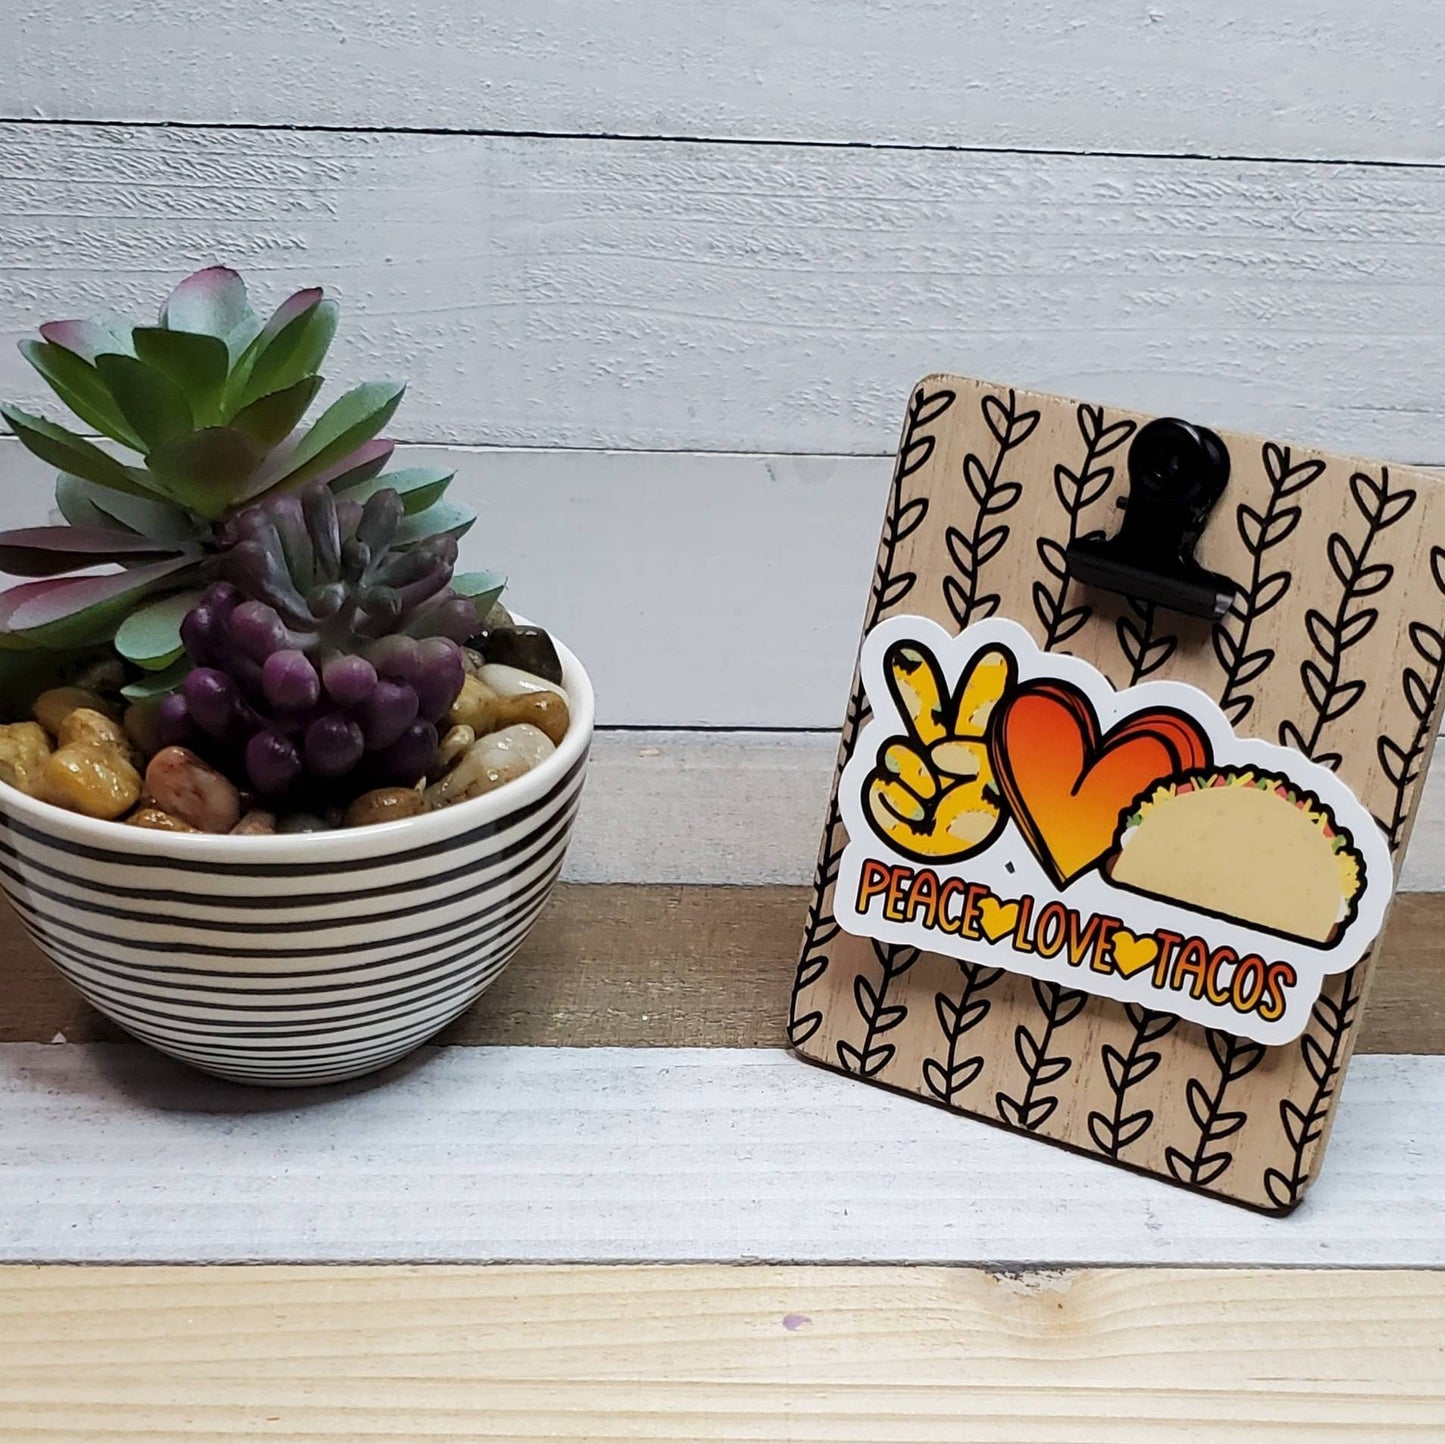 Peace Love and Tacos, Die Cut Sticker, Novelty Sticker, Love Sticker,  Bullet Journal, Planning Stickers, Laptop Sticker, Taco Tuesday